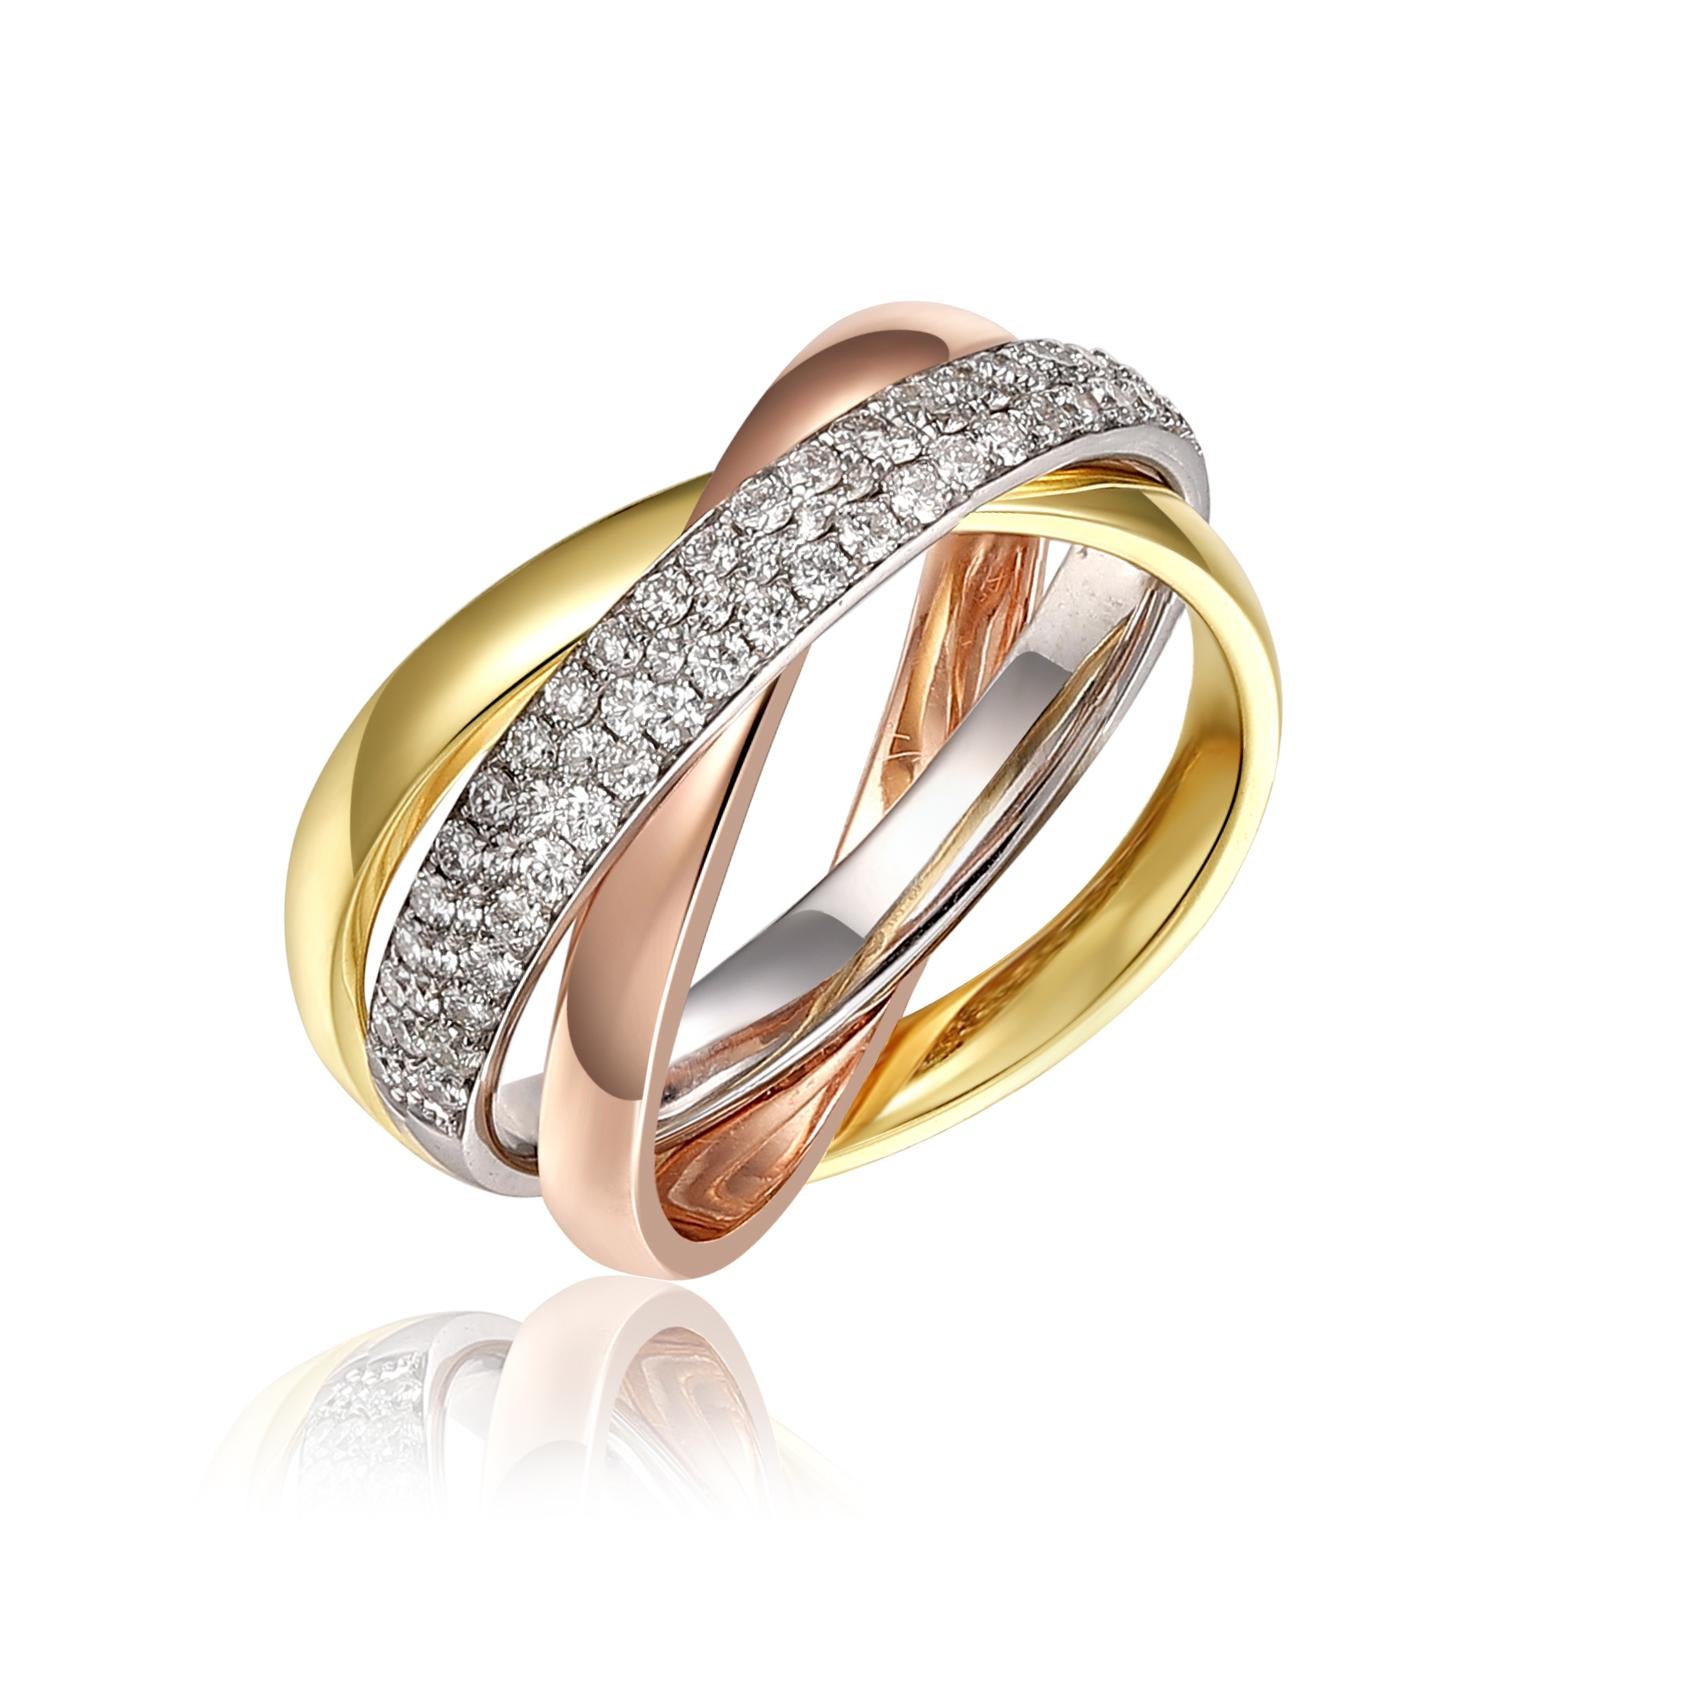 14k white, rose and yellow gold, with 0.69cts round diamonds, G color, VS2 clarity.